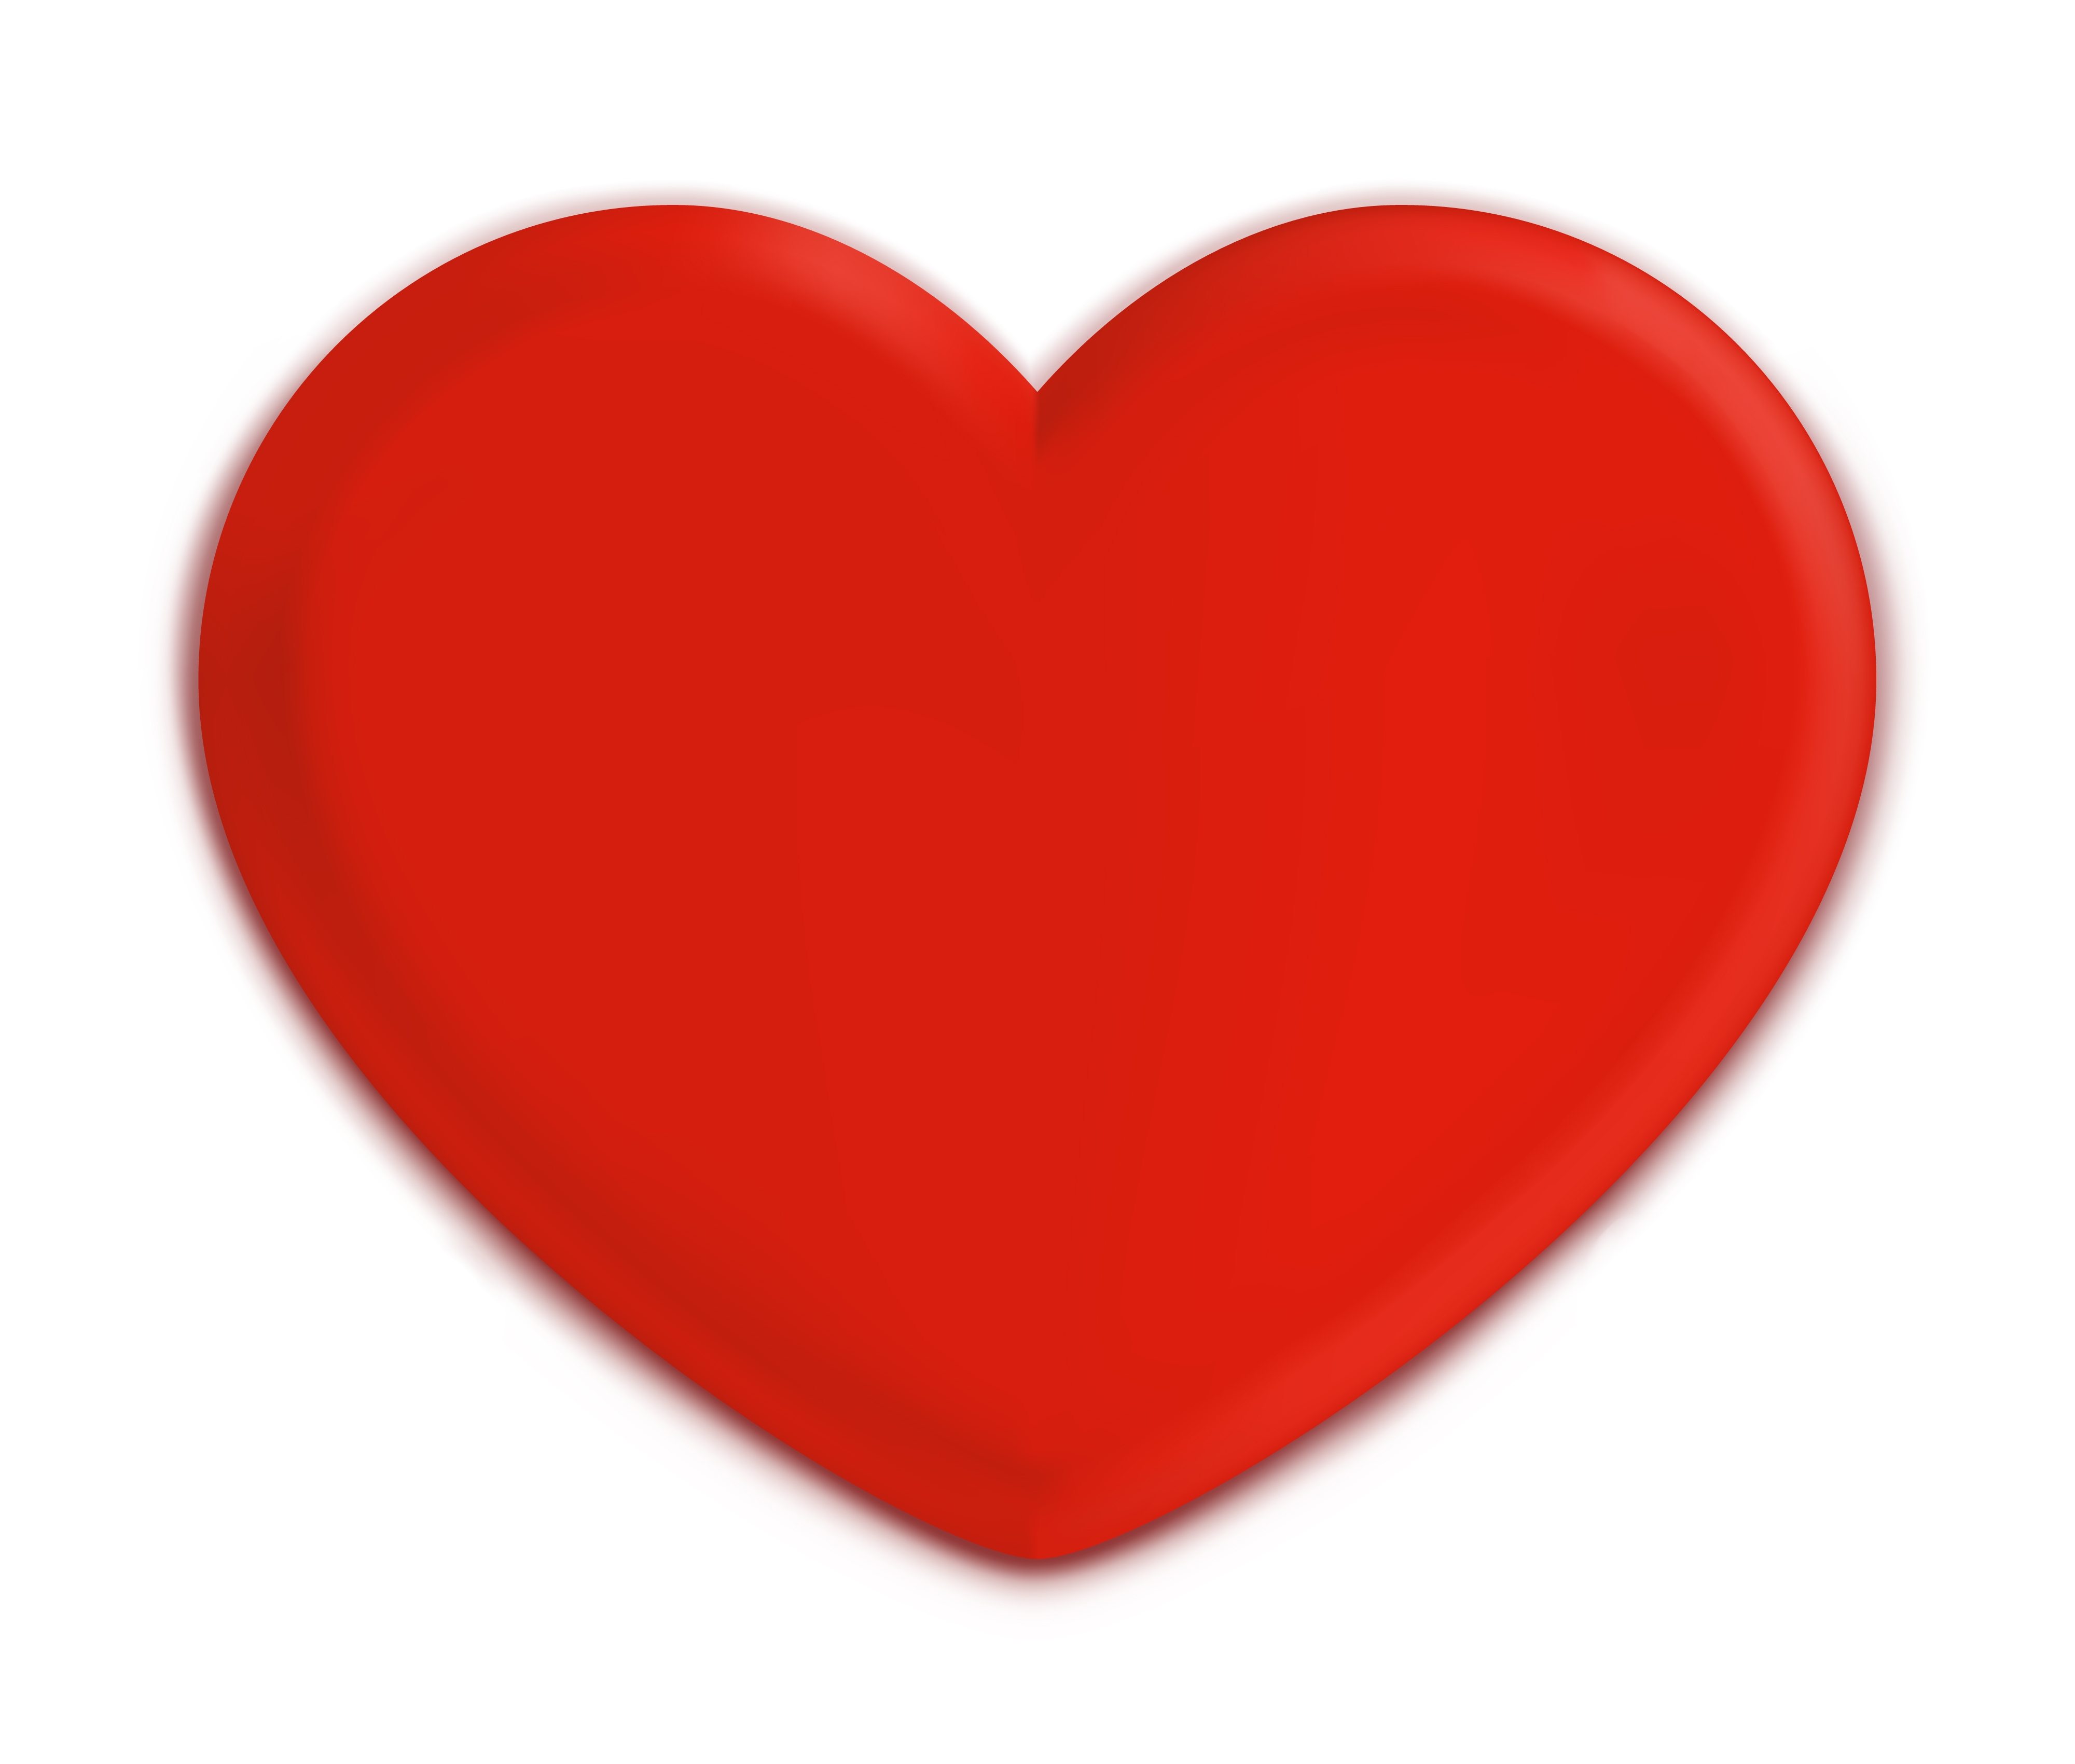 Big Red Heart Picture - ClipArt Best